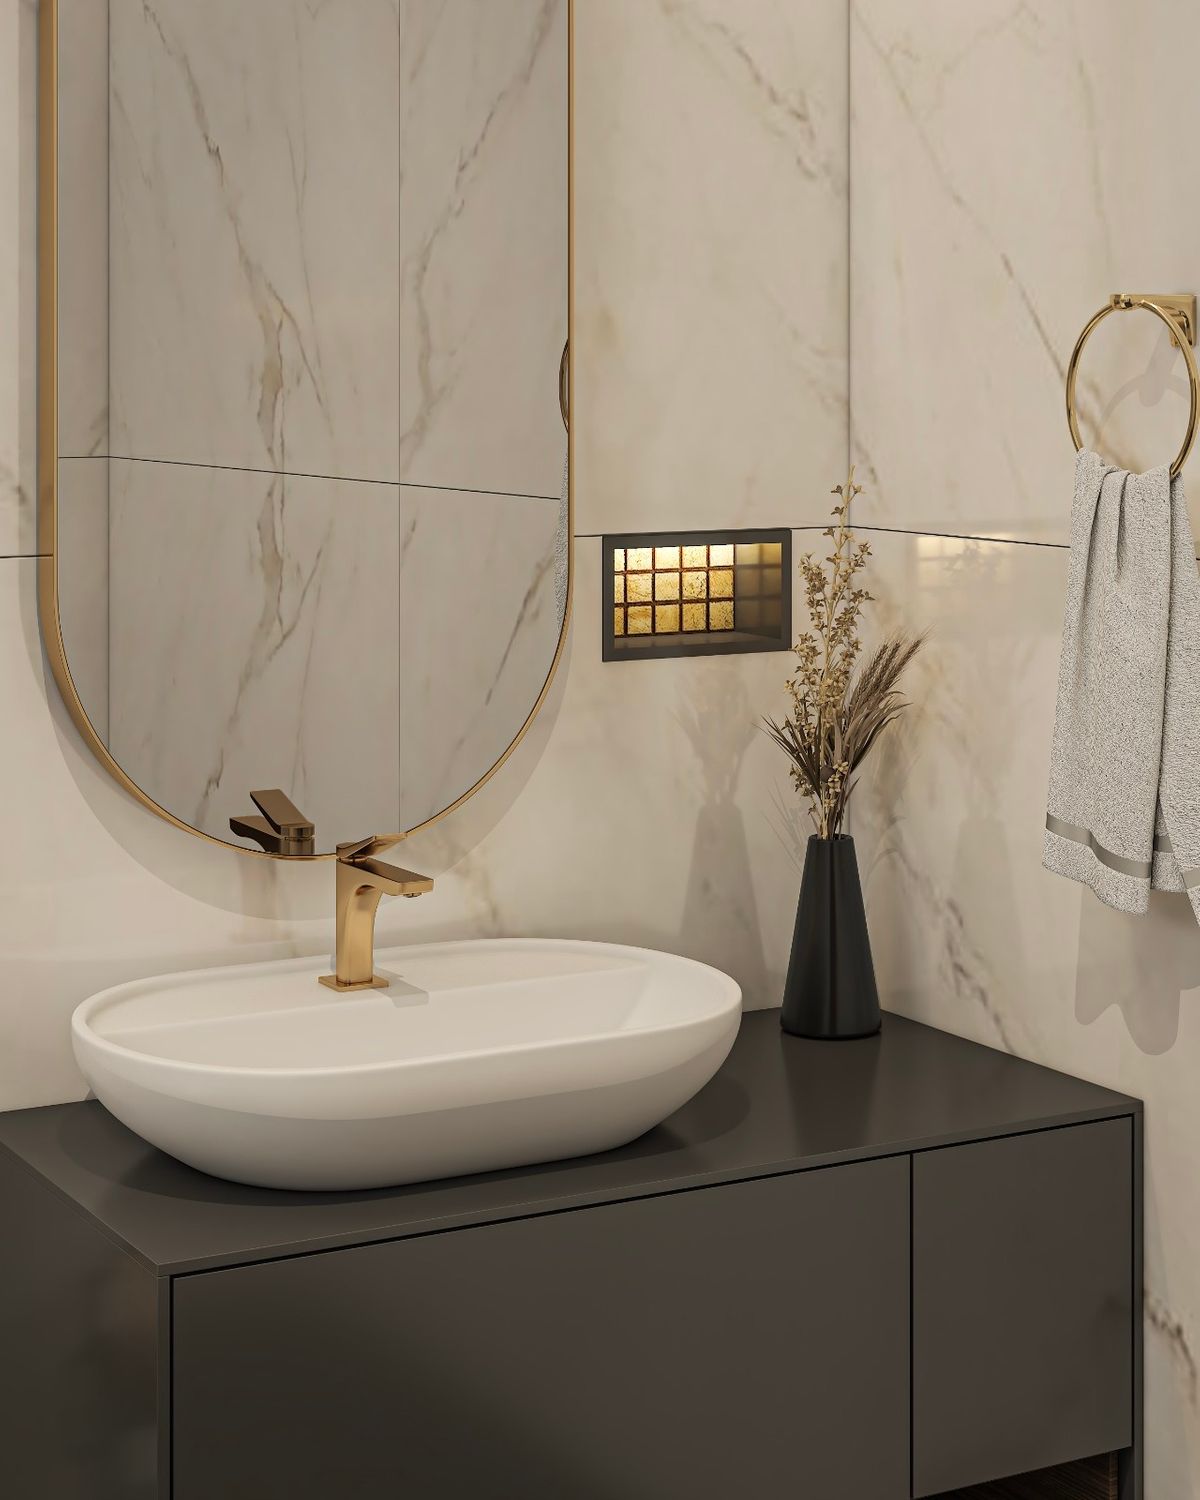 Exquisite IN85 Niche with Gold 1x1 Mosaic and Black Granite